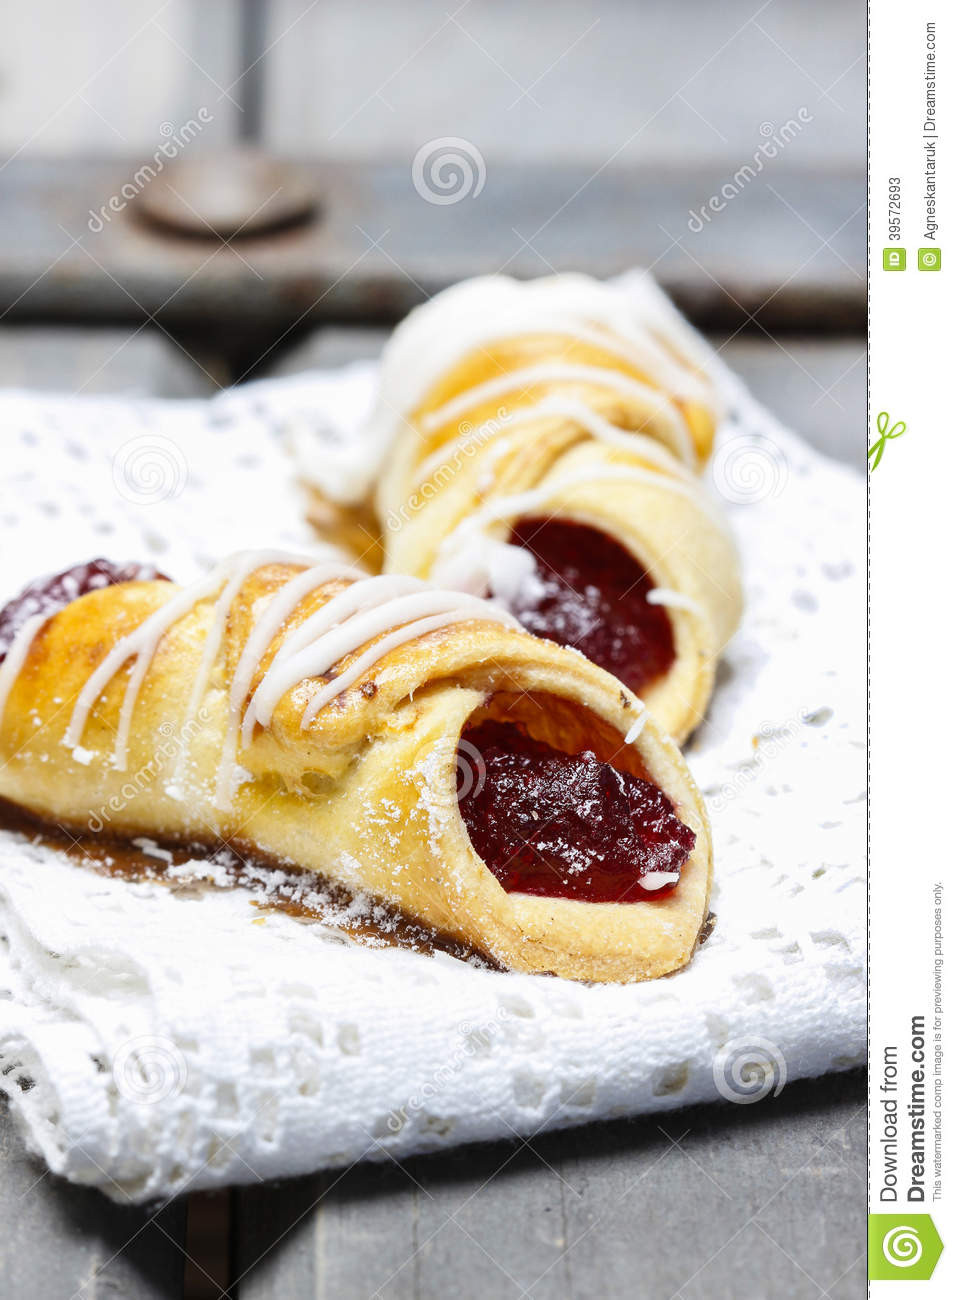 Jam Filled Shortbread Cookies
 Shortbread Cookies Filled With Jam Stock Image